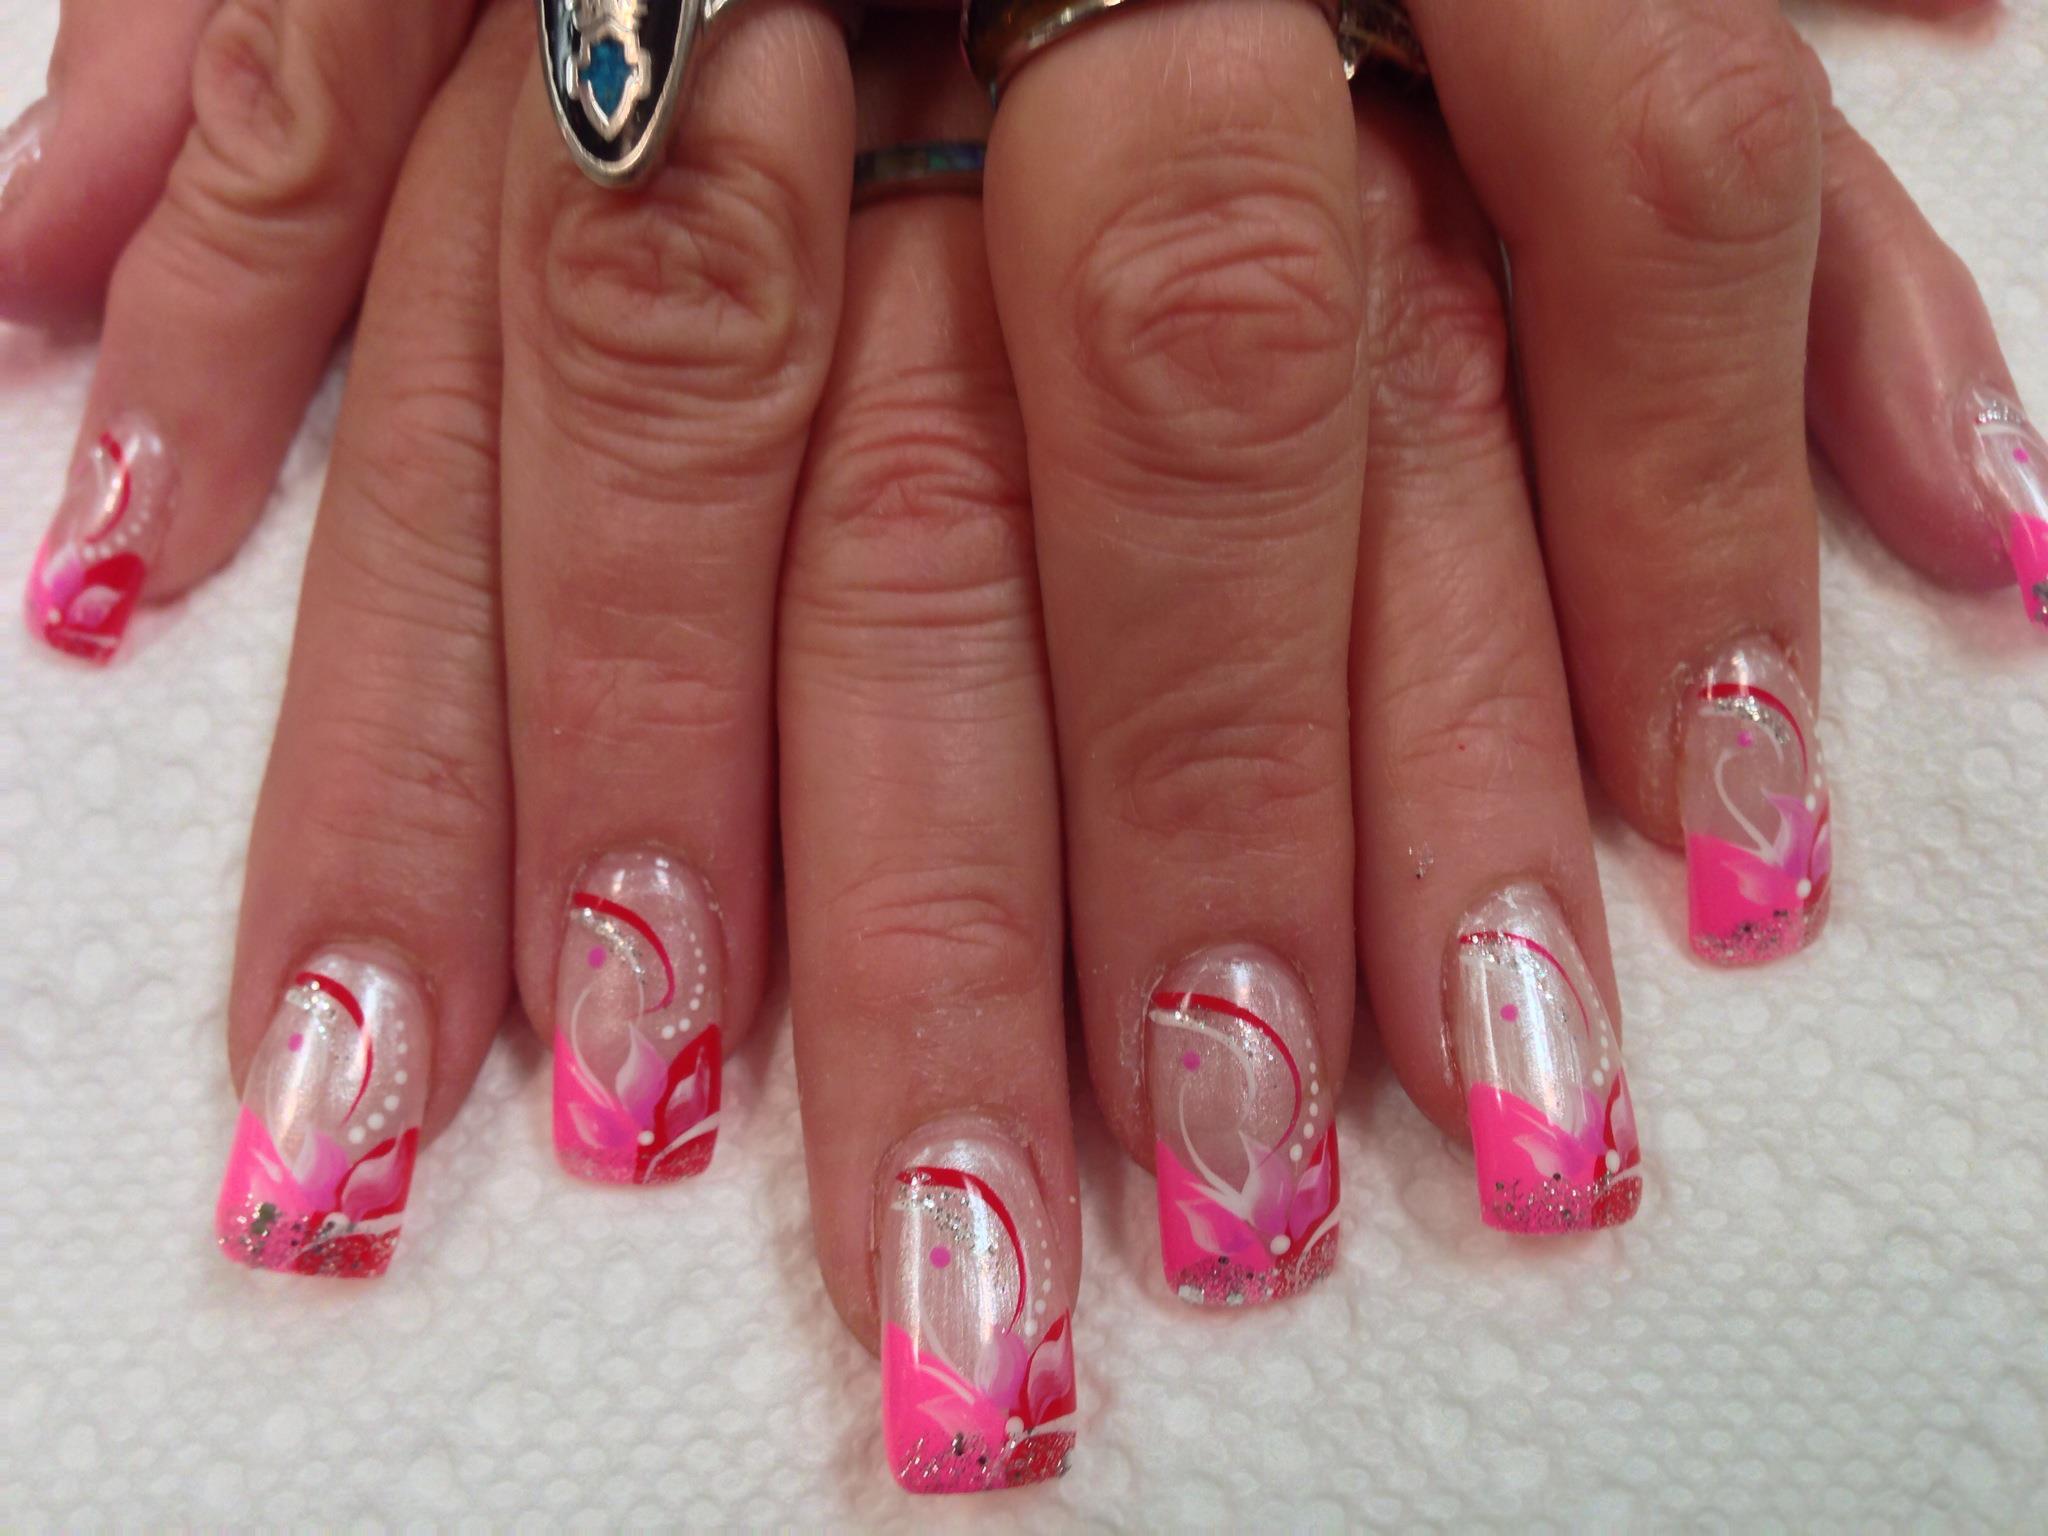 5. "Cute Valentine's Day Nail Designs to Show Your Love and Affection" - wide 5